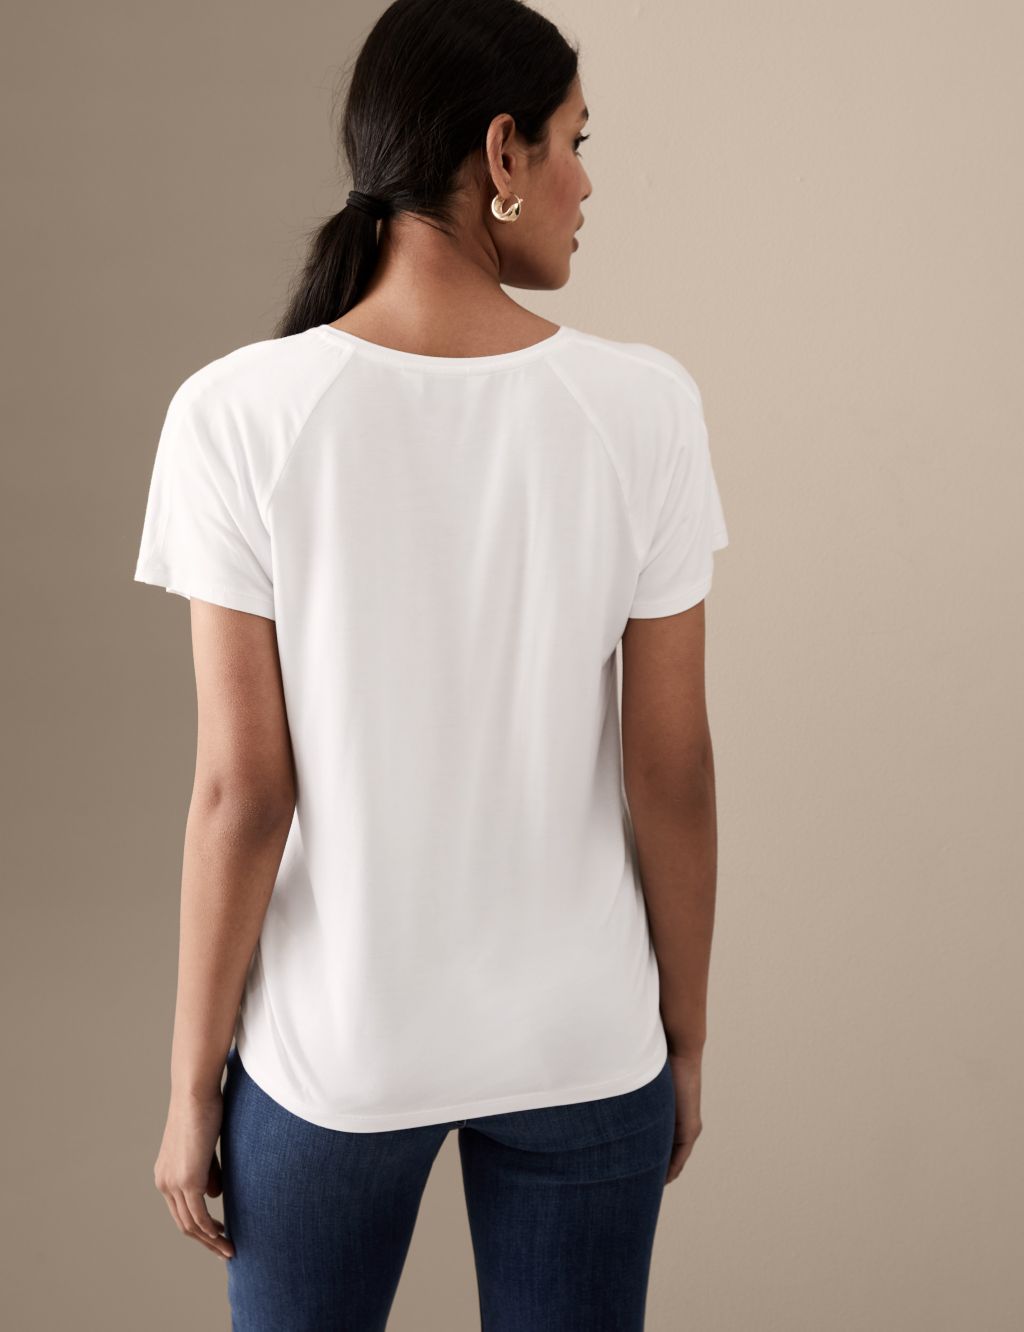 Jersey V-Neck Relaxed T-Shirt image 4